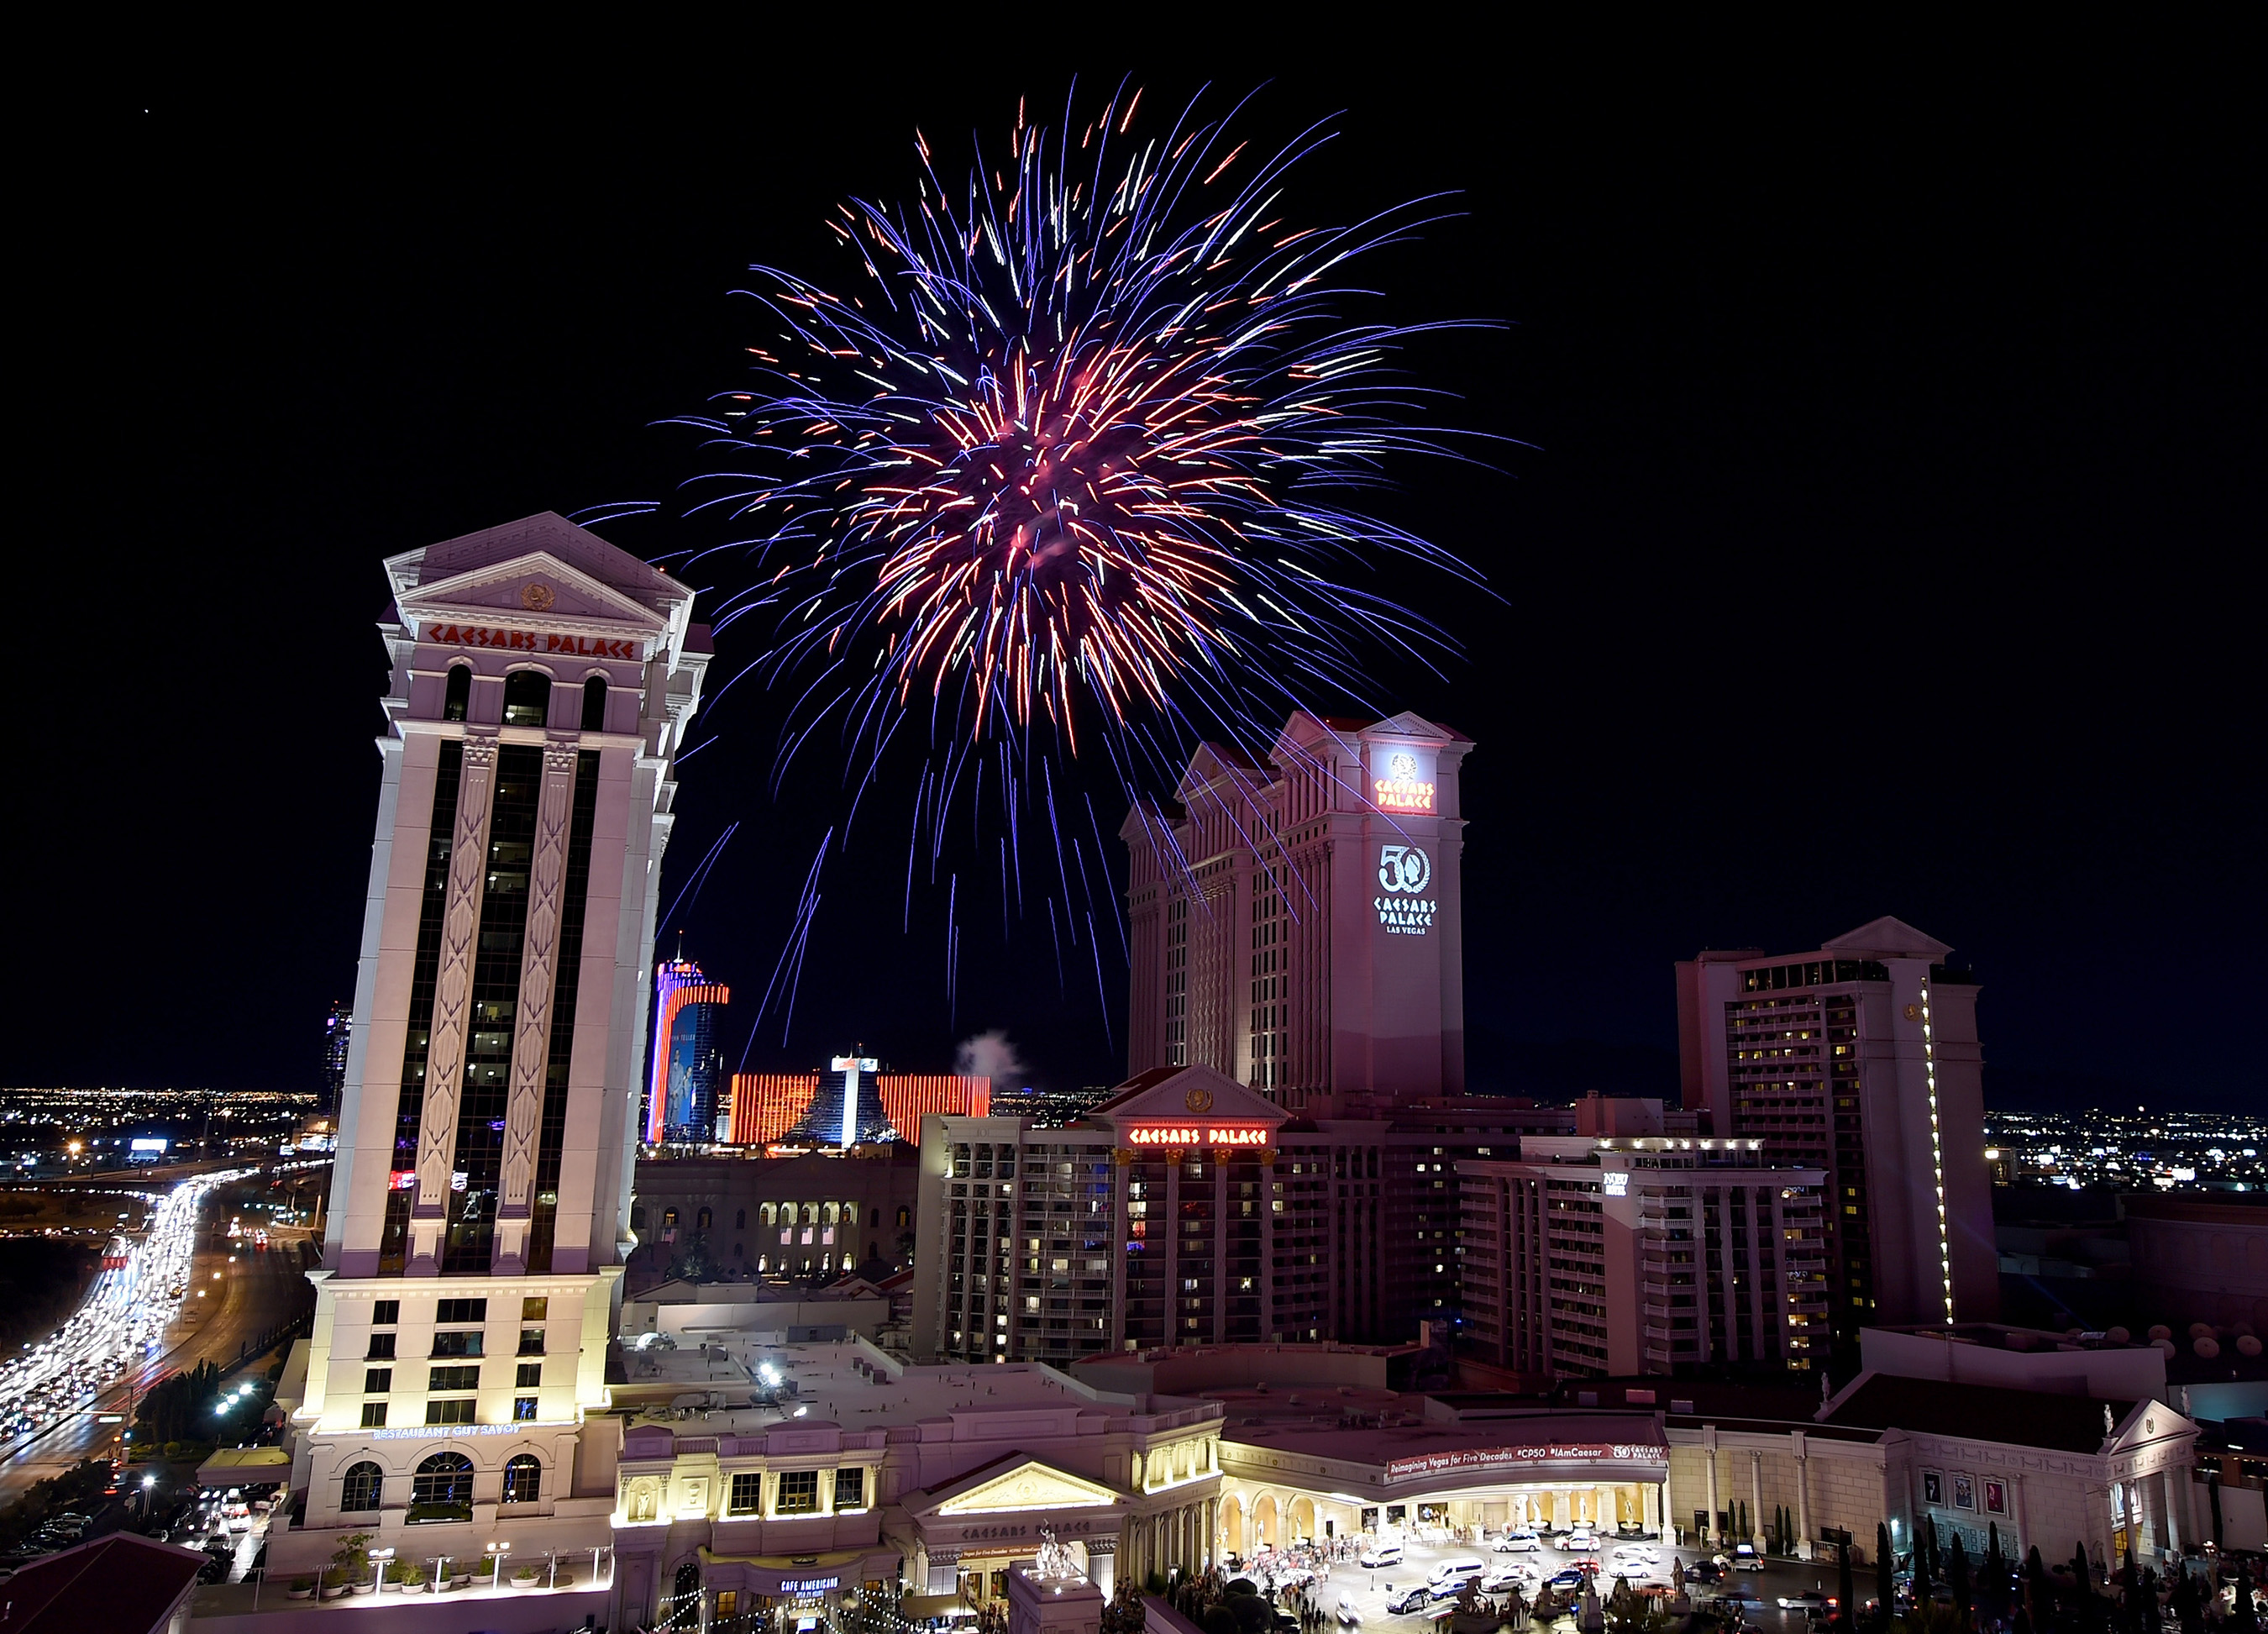 The 50th Anniversary celebration of Caesars Palace continues with an Independence Day Weekend fireworks extravaganza. Photo Credit: Ethan Miller/Getty Images